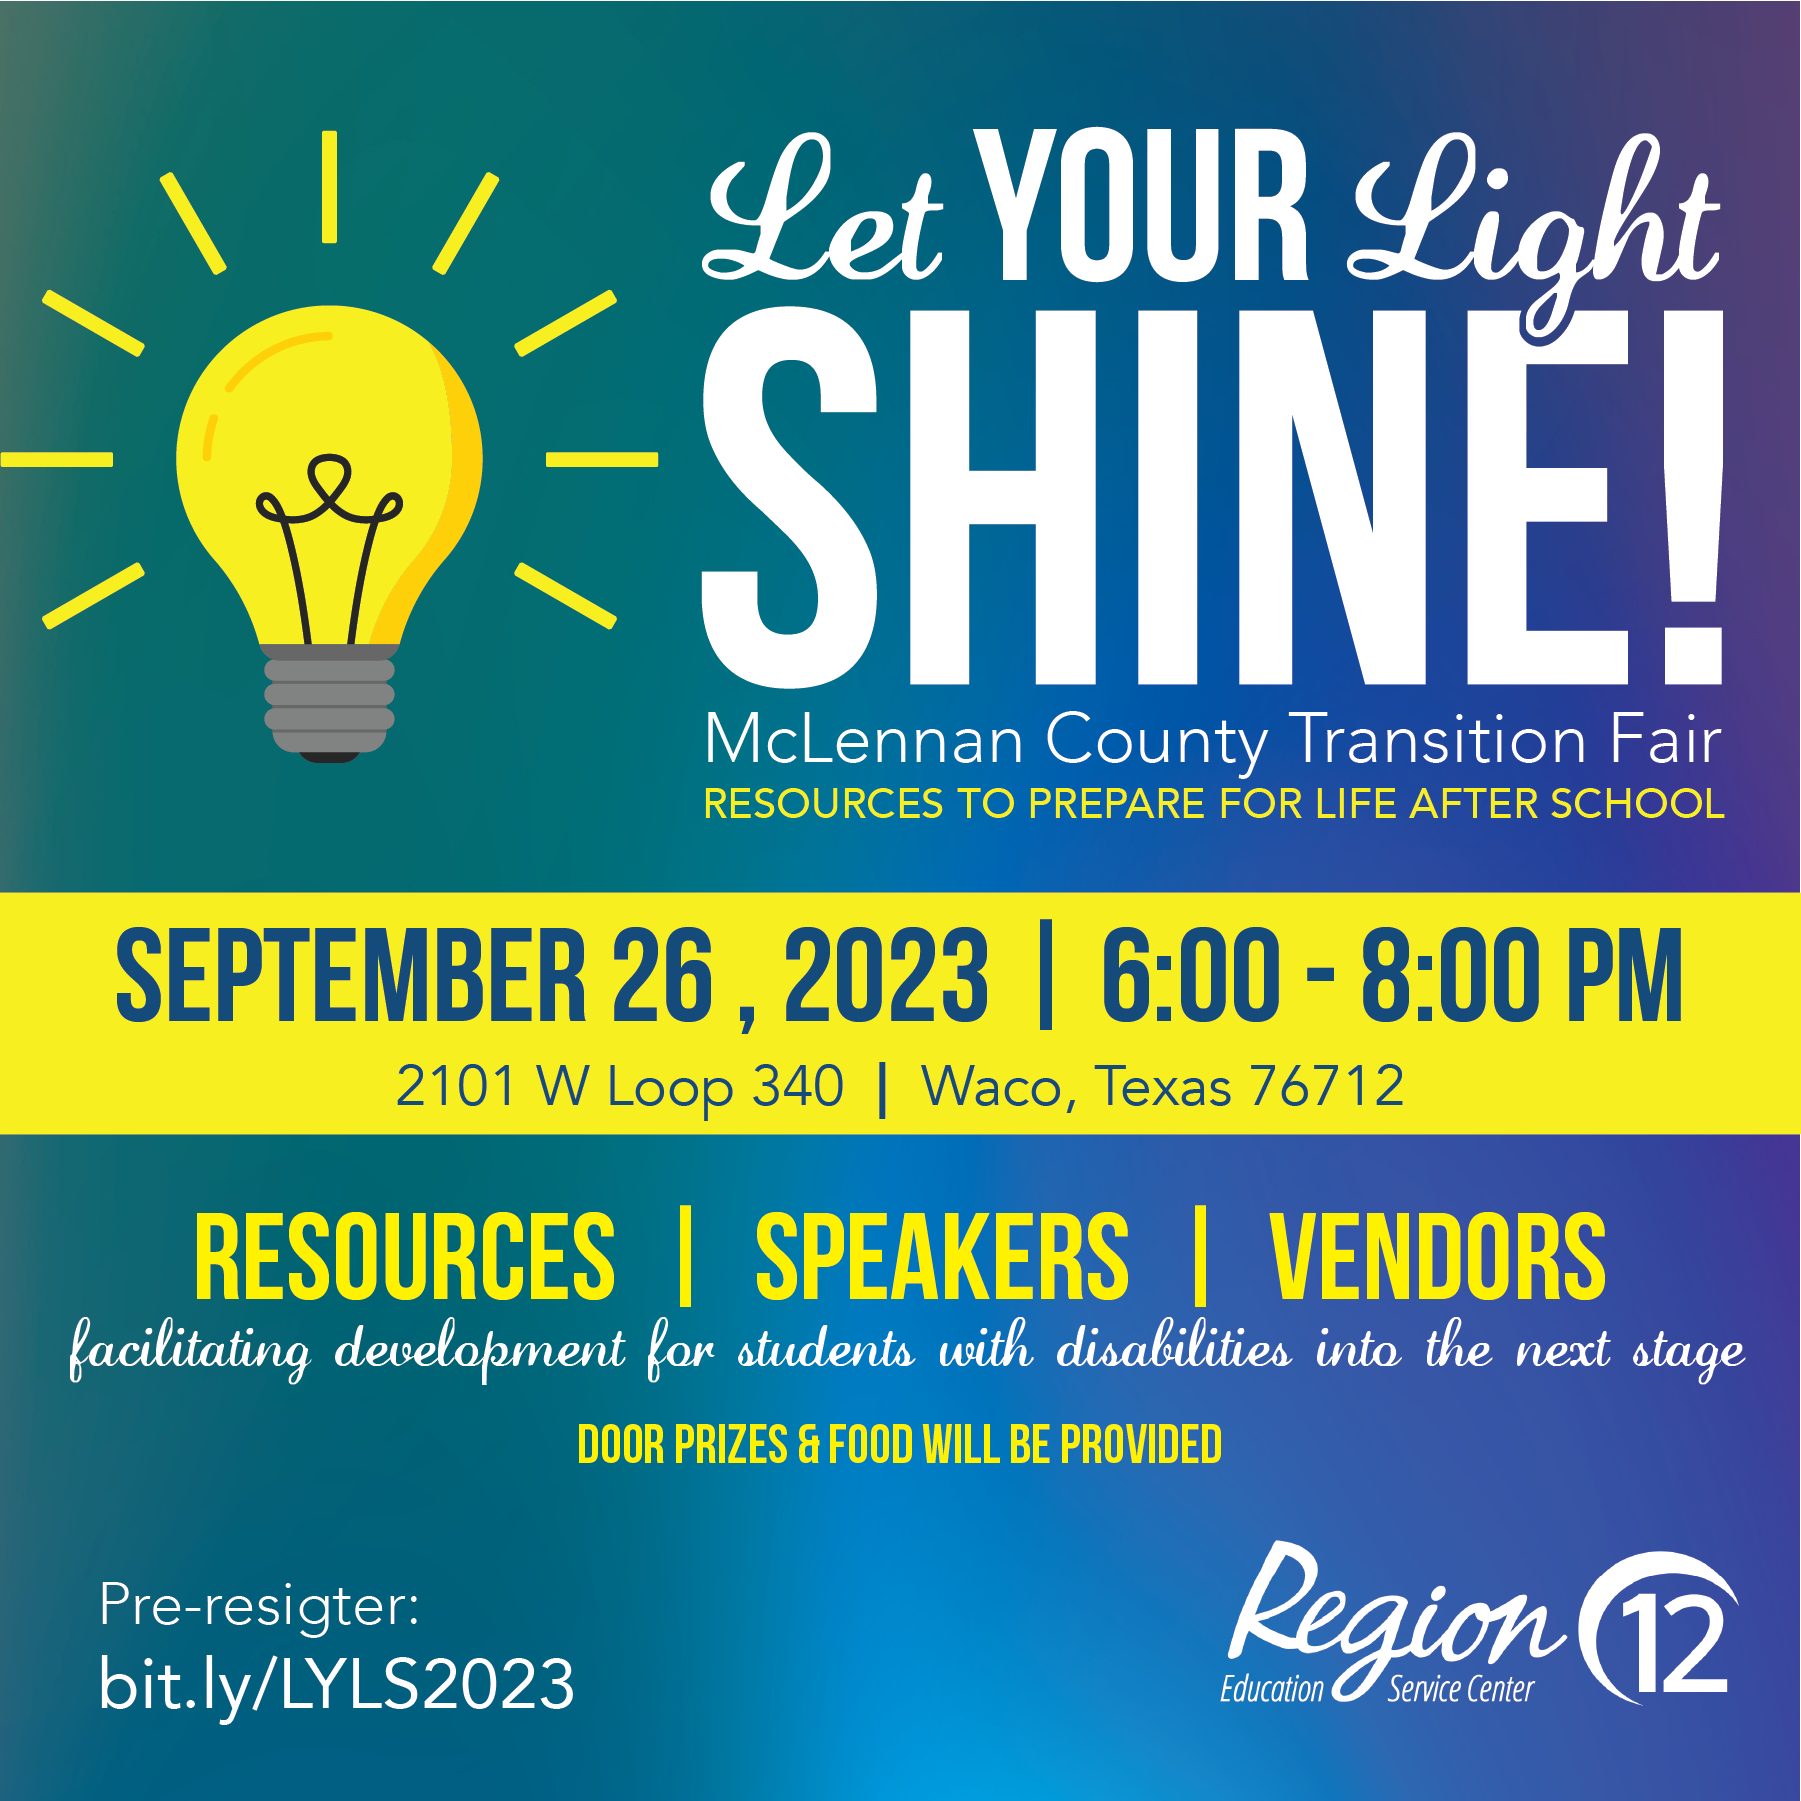 2023 Let Your Light Shine: McLennan County Transition Fair on September 26 from 6:00 to 8:00 p.m. graphic